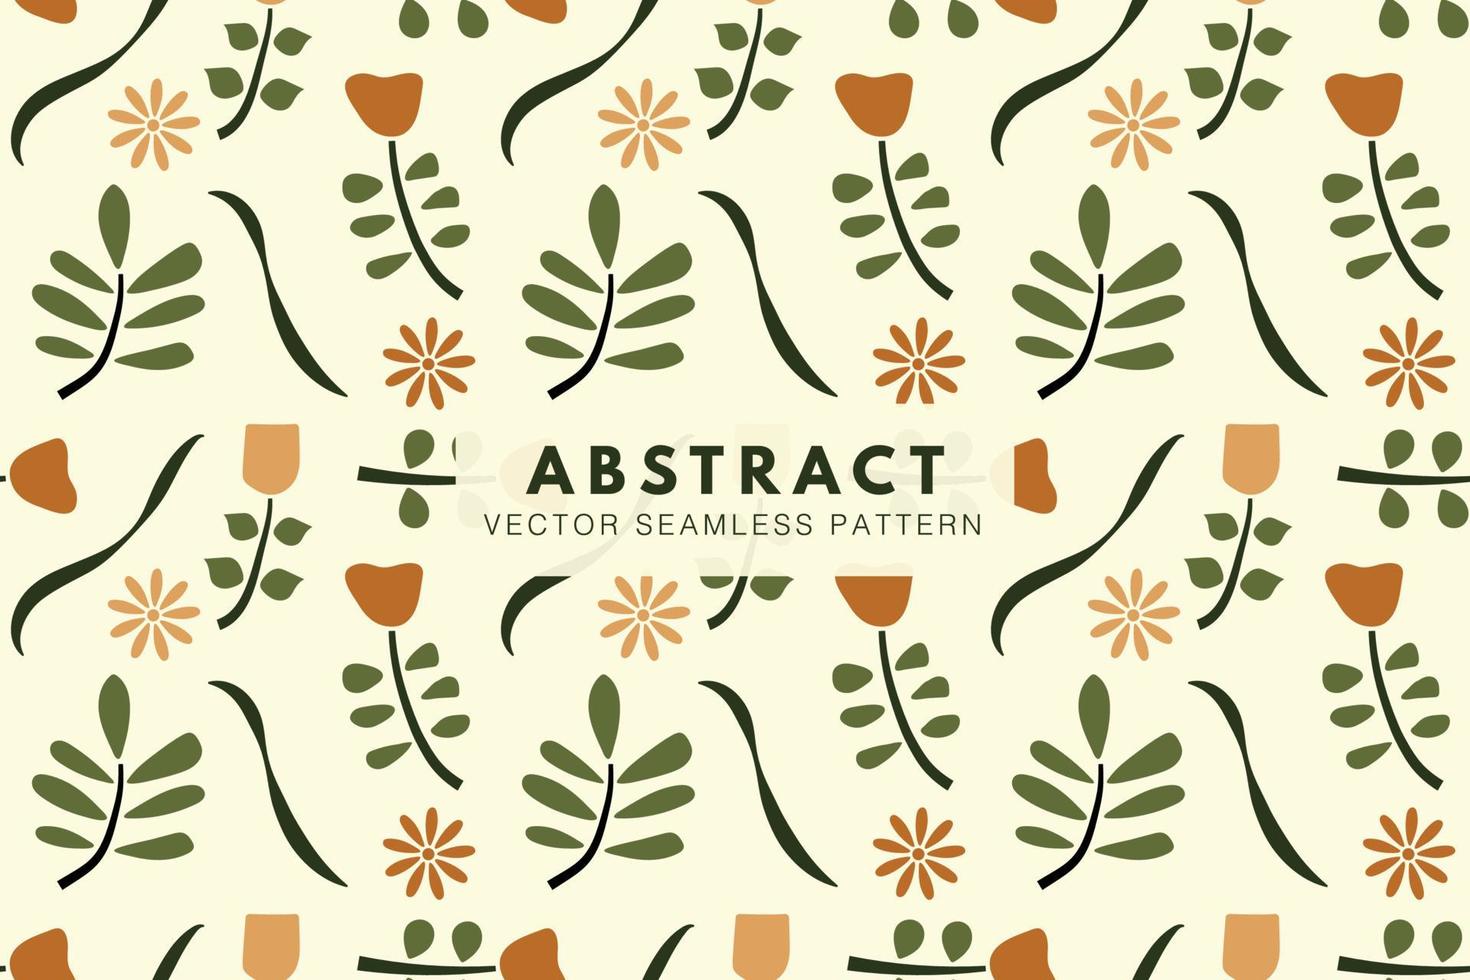 Floral abstract organic shapes repeating pattern vector seamless